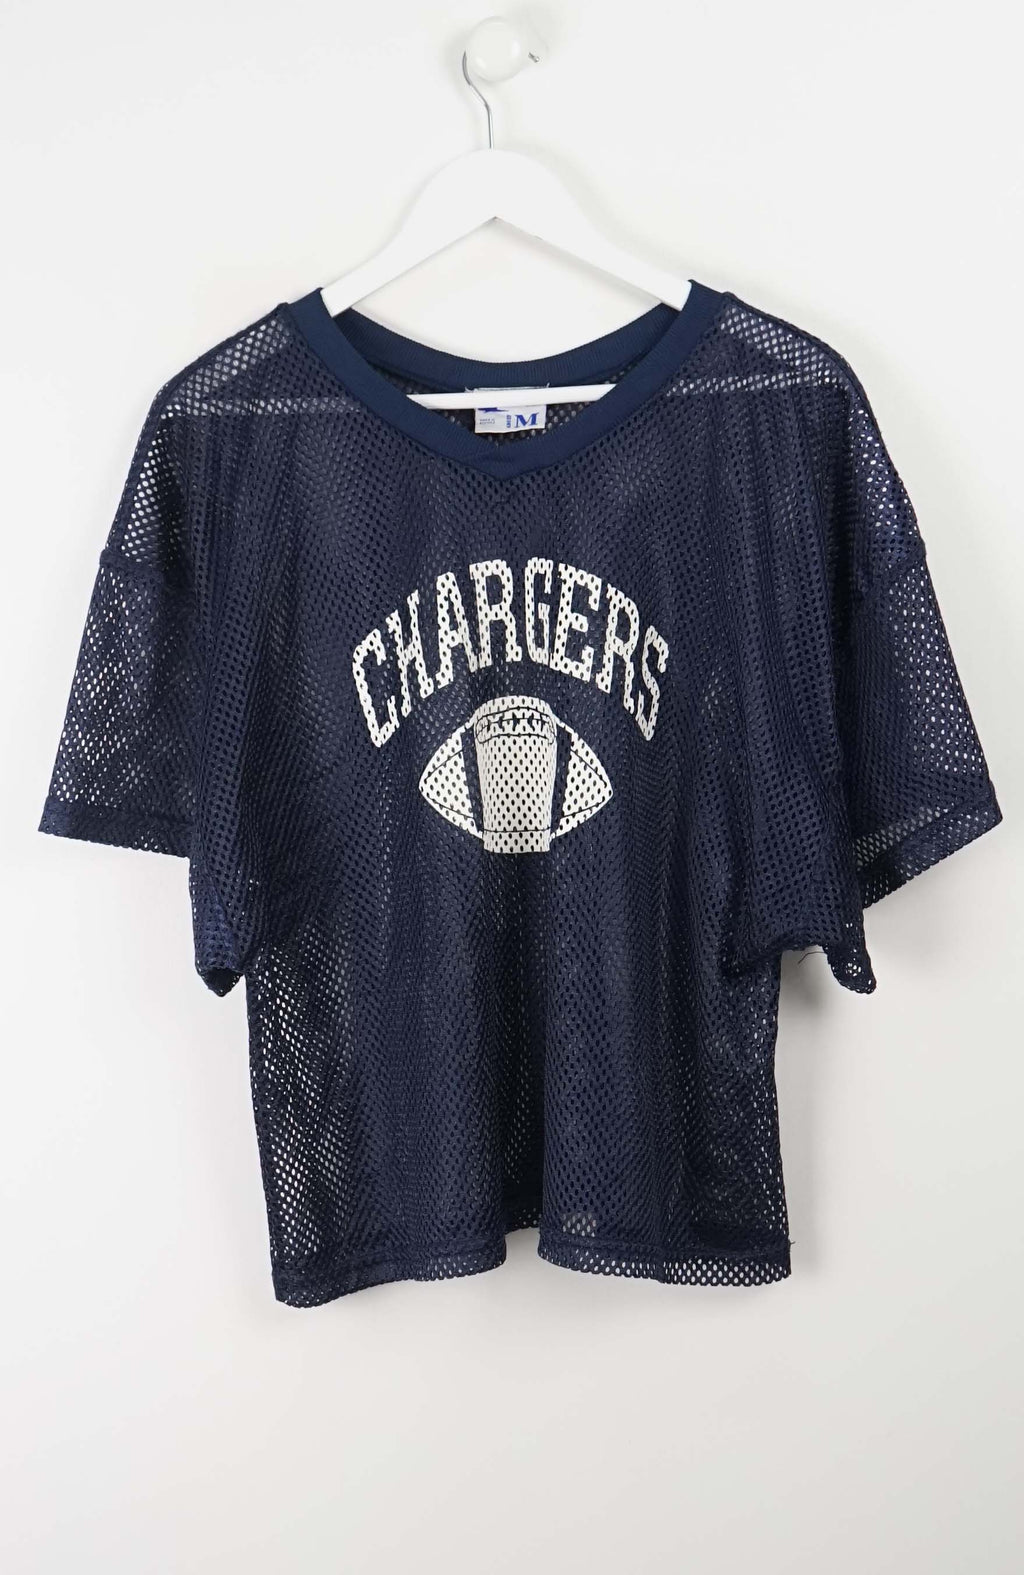 VINTAGE NFL CHARGERS CROPPED JERSEY (L)